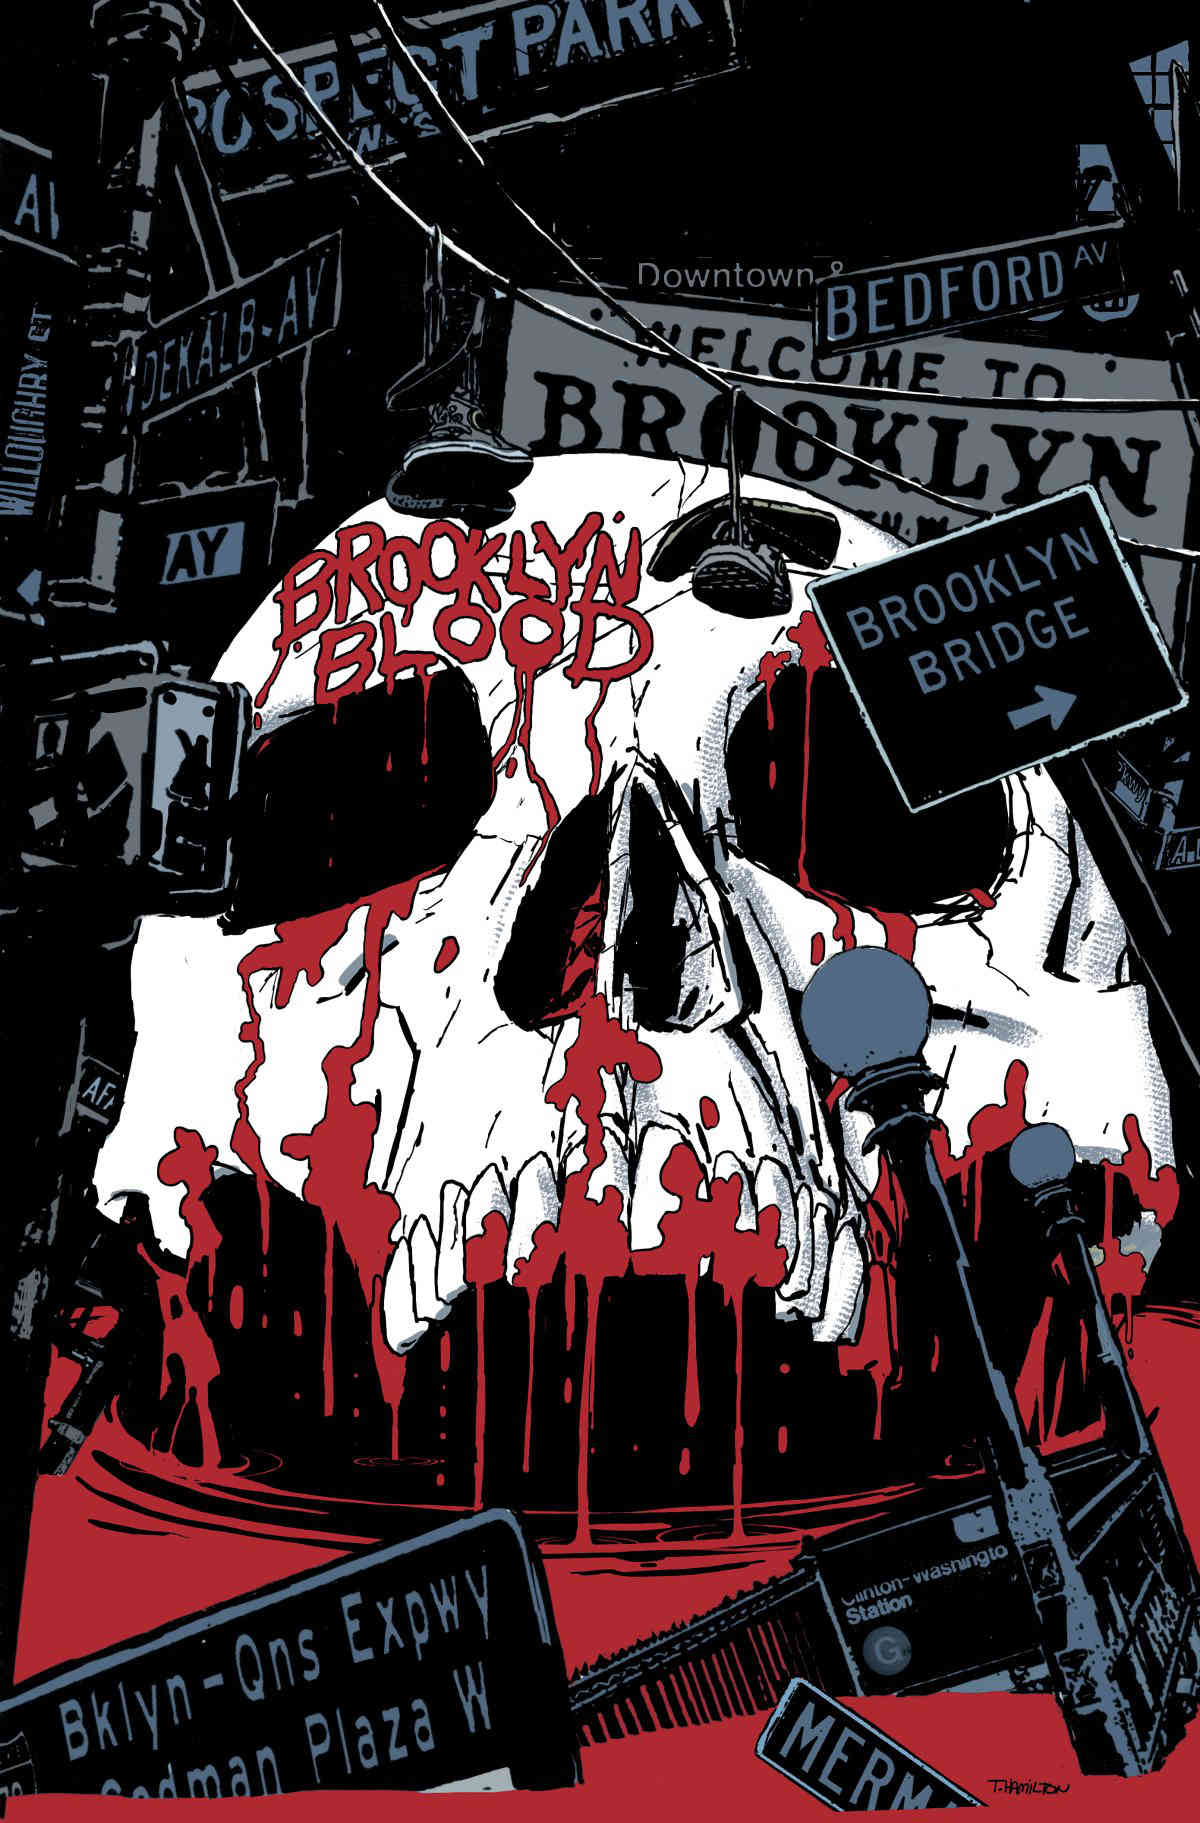 Graphic violence: Famed comic book writer pens 'Brooklyn Blood